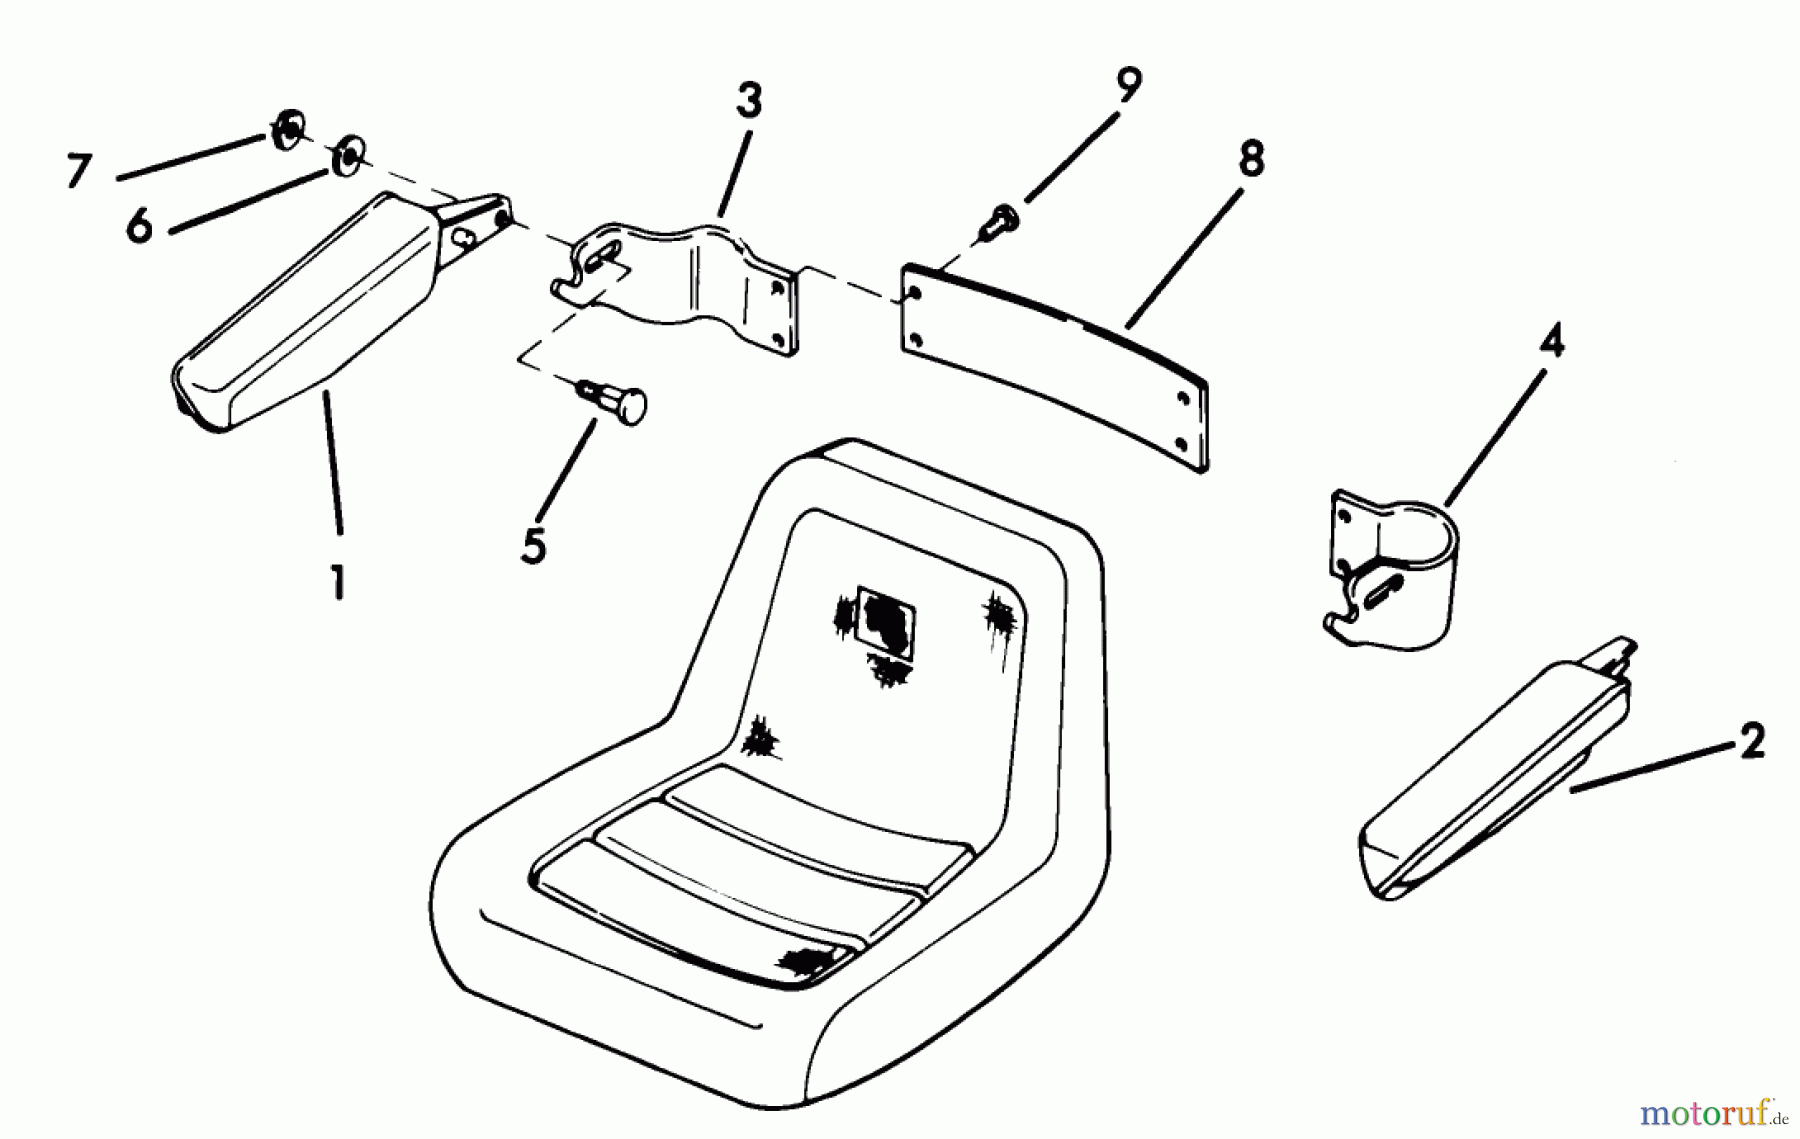  Toro Neu Accessories, Mower 82015 - Toro Arm Rest Kit, D-Series Tractor, 1976 PARTS LIST FOR ARM REST KIT (FACTORY ORDER NUMBER 8-2015)